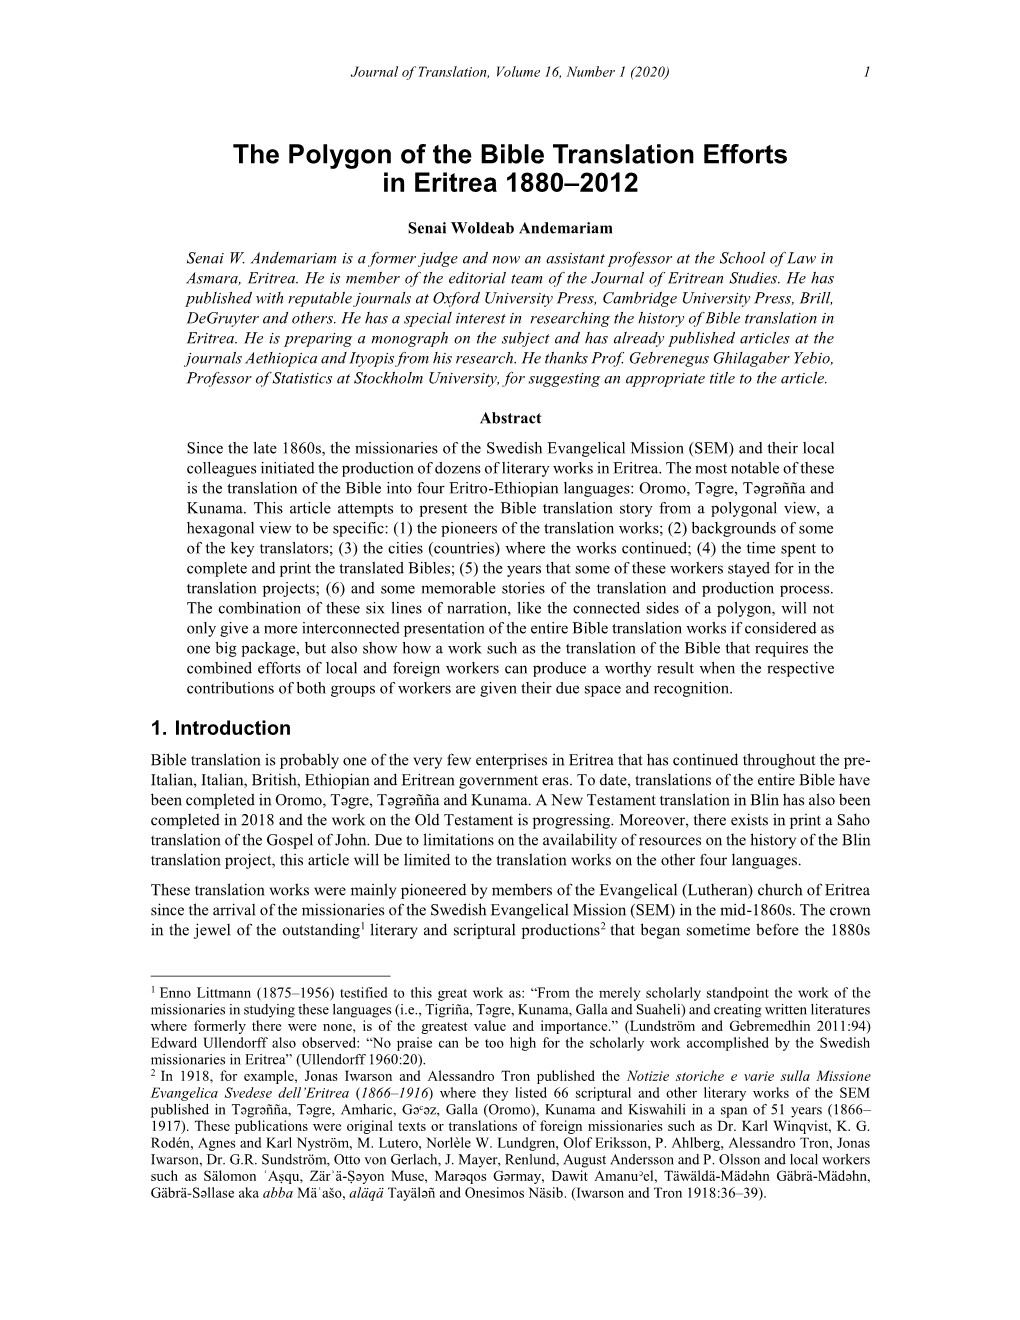 The Polygon of the Bible Translation Efforts in Eritrea 1880-2012